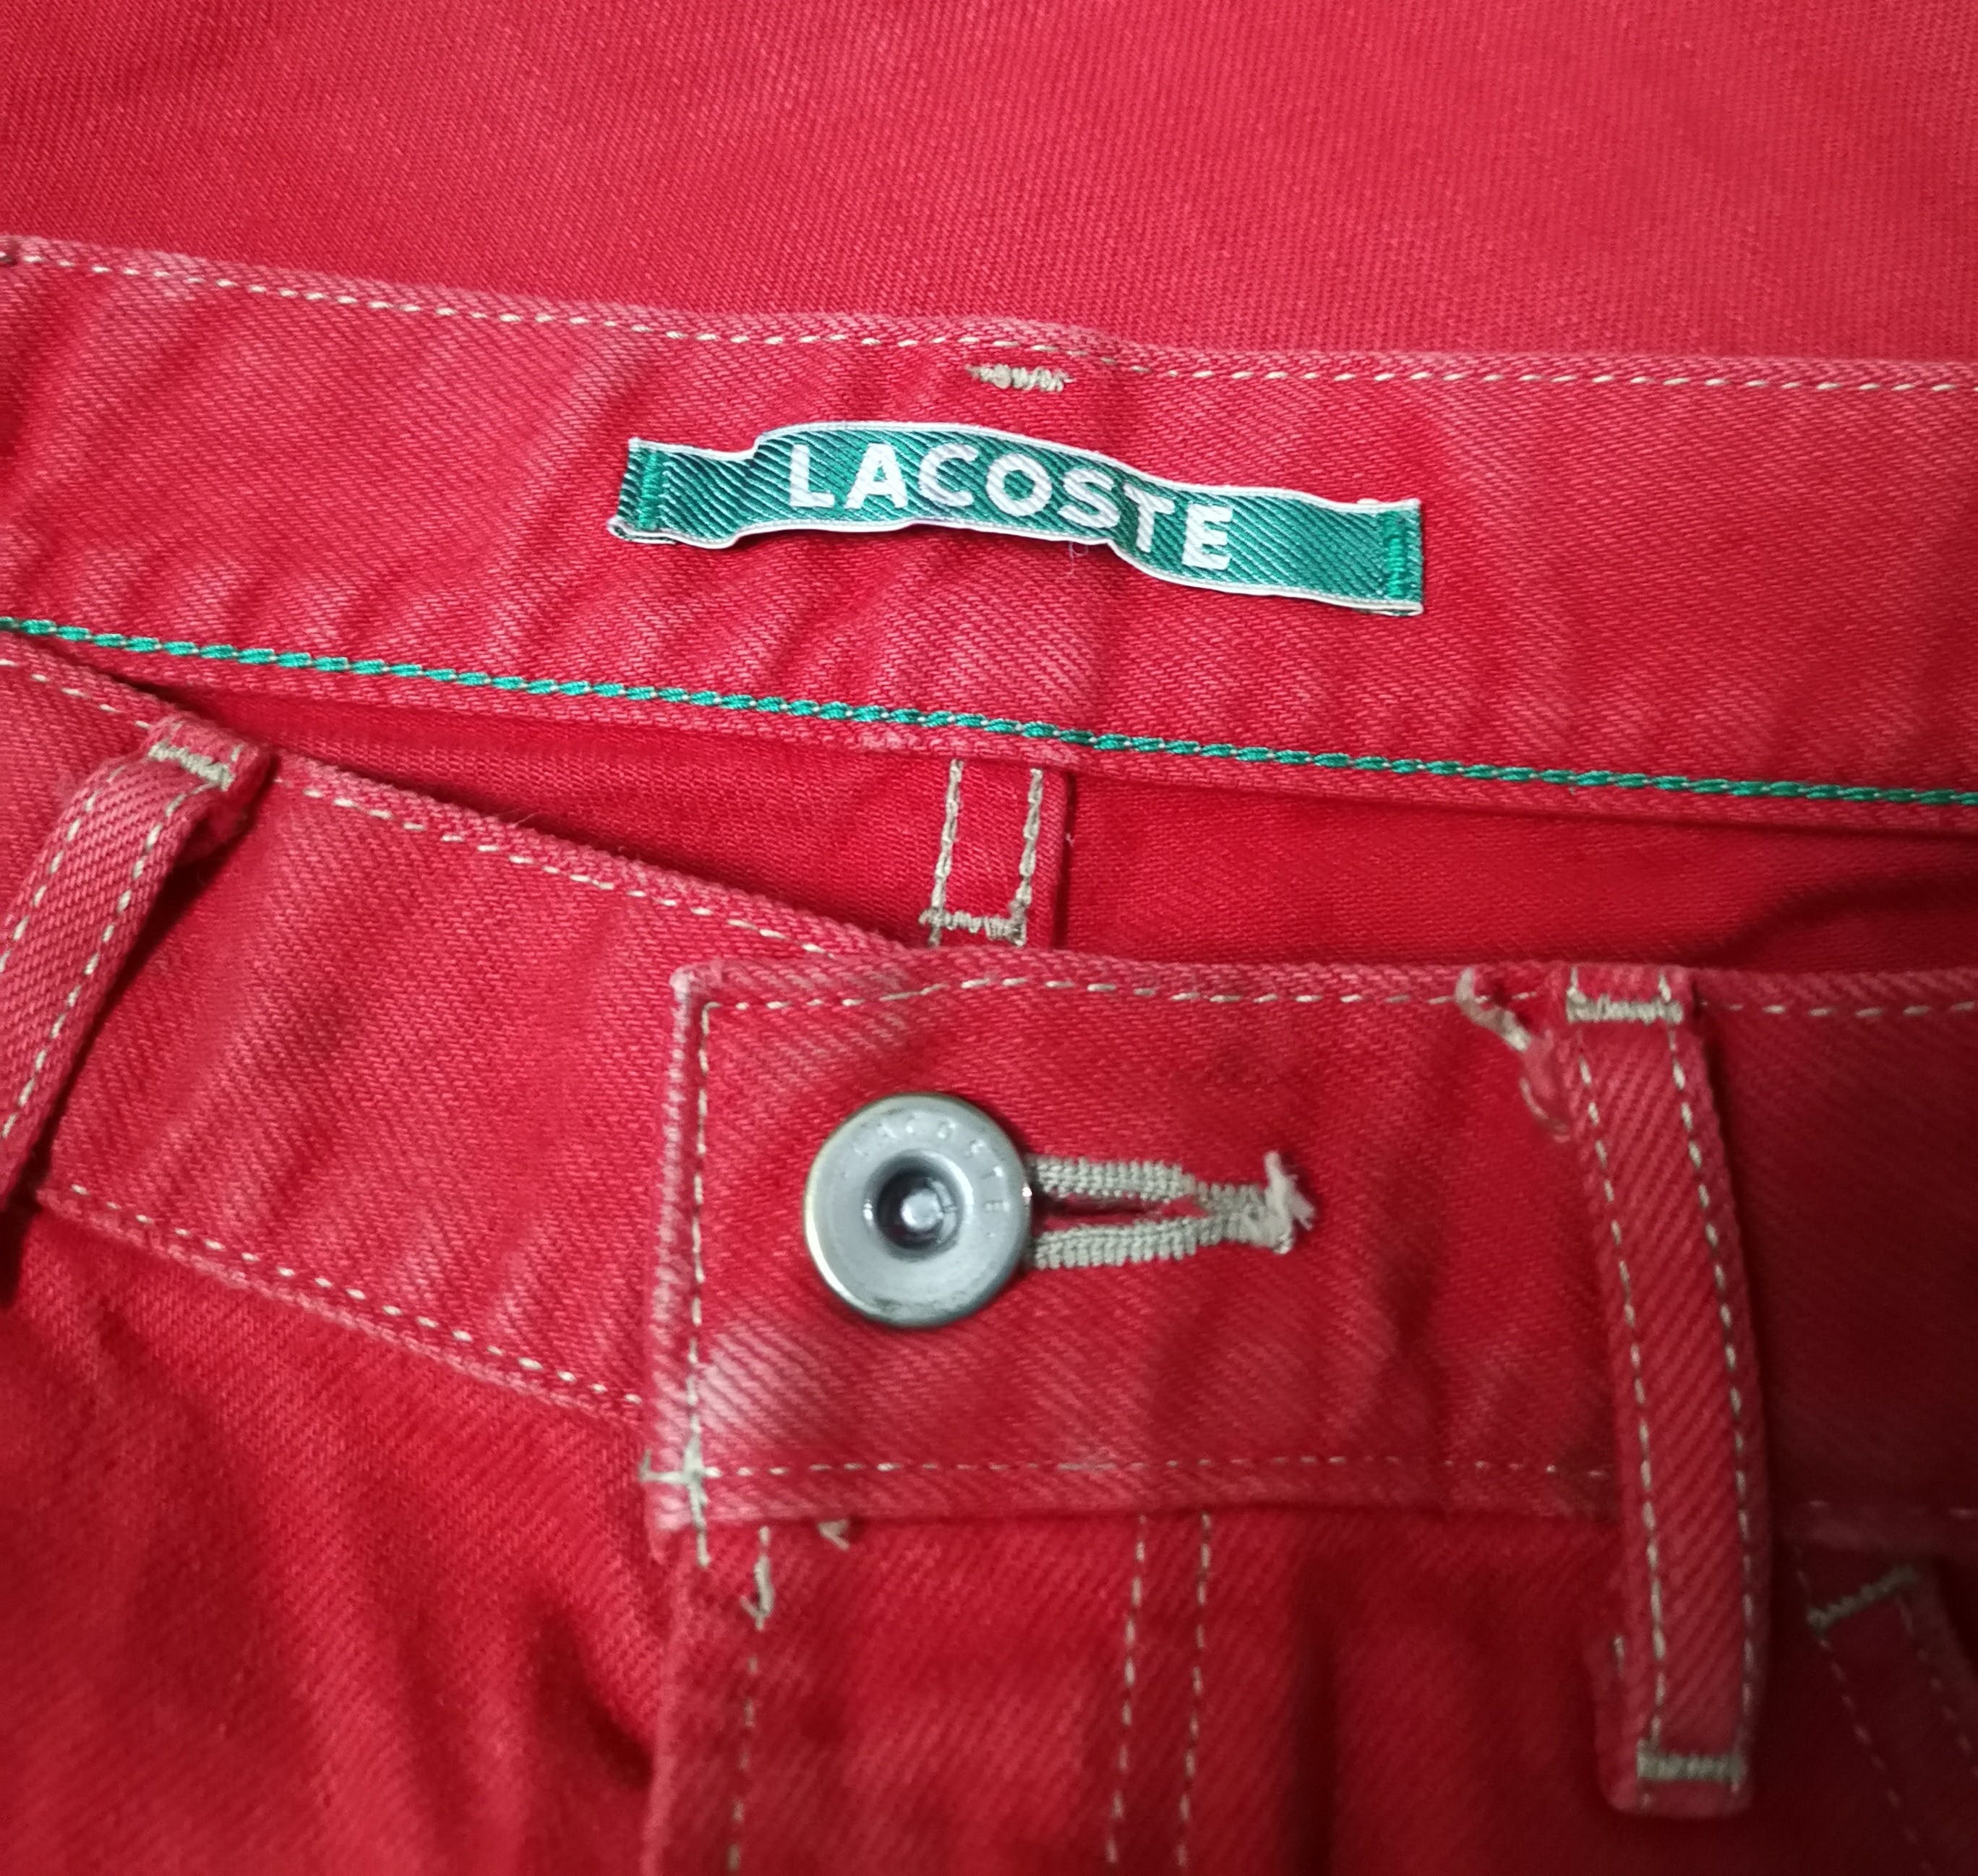 Lacoste Dirty Red Denim - 5